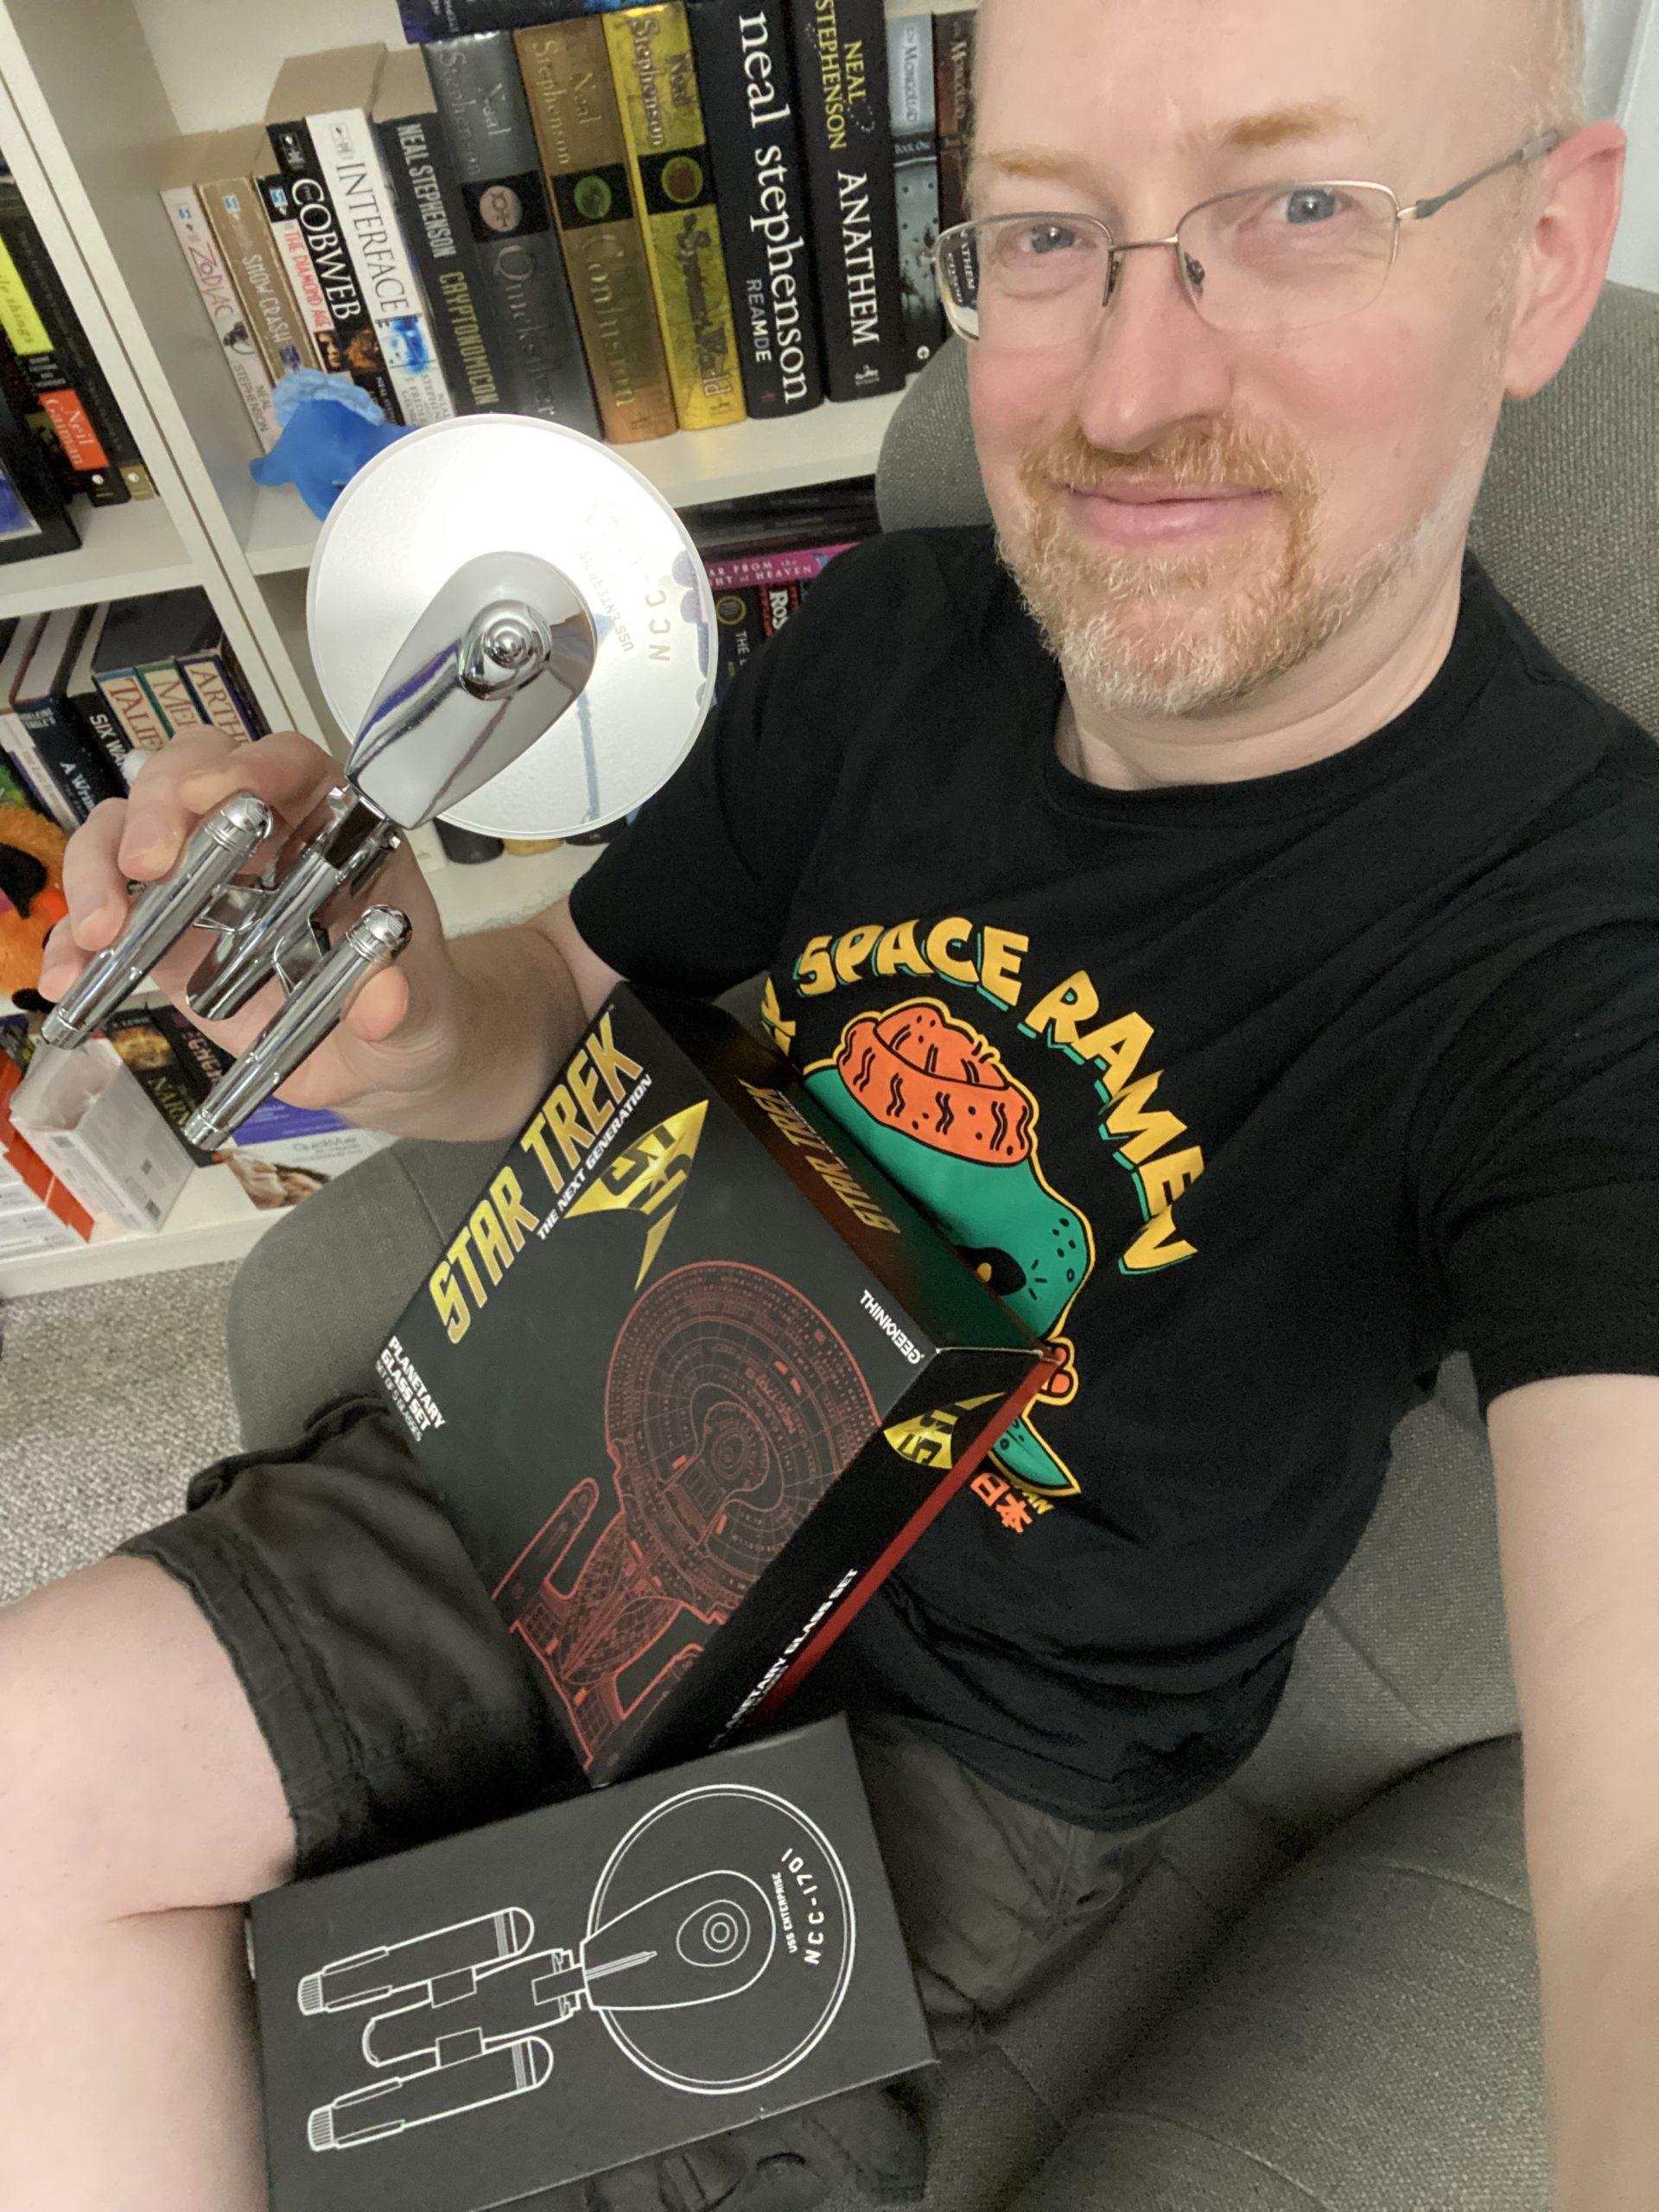 Me sitting in a chair in front of a bookcase, with boxes for Star Trek glassware and a pizza cutter in the shape of the original Enterprise in my lap, holding the pizza cutter.